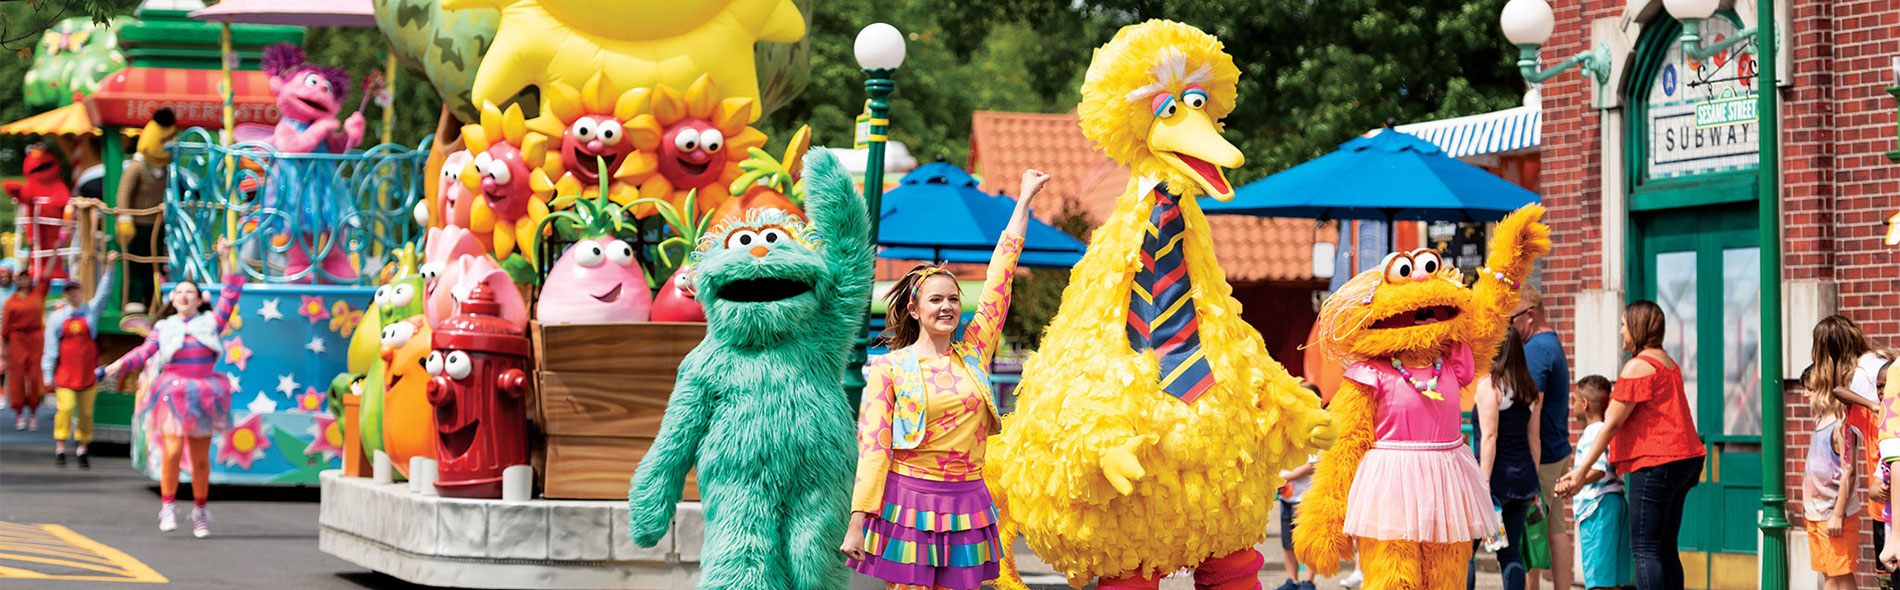 Sesame Street Characters Parading at Sesame Place